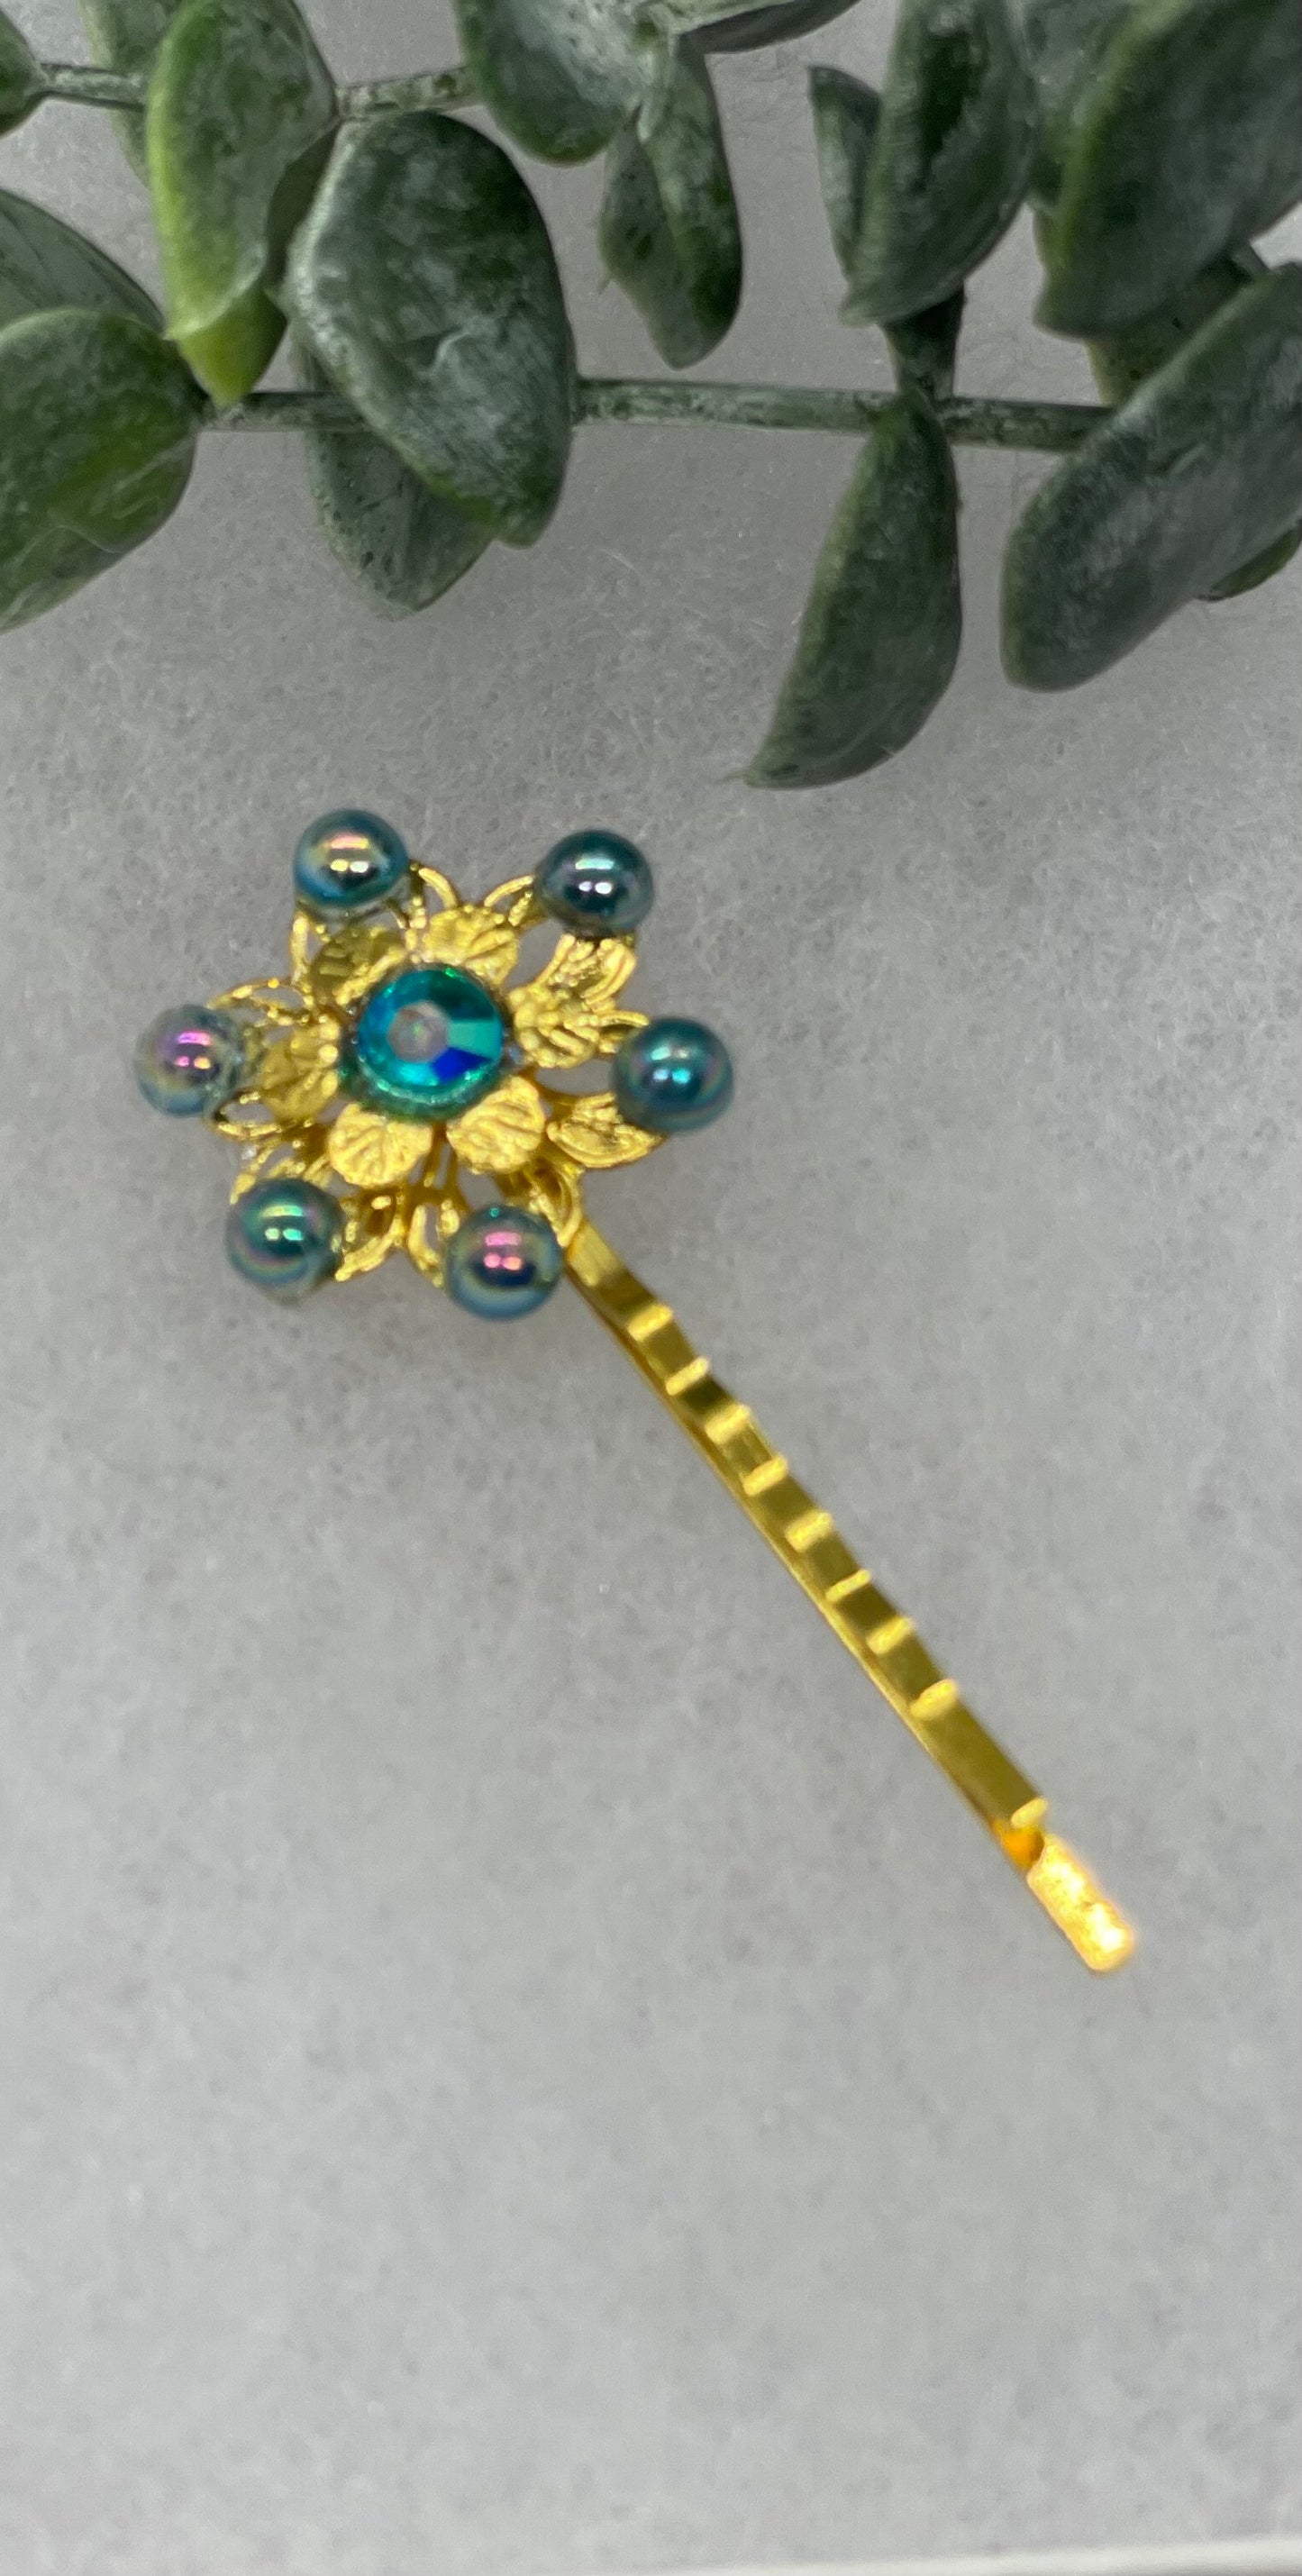 iridescent Teal crystal Gold Antique vintage Style approximately 3.0” flower hair pin wedding engagement